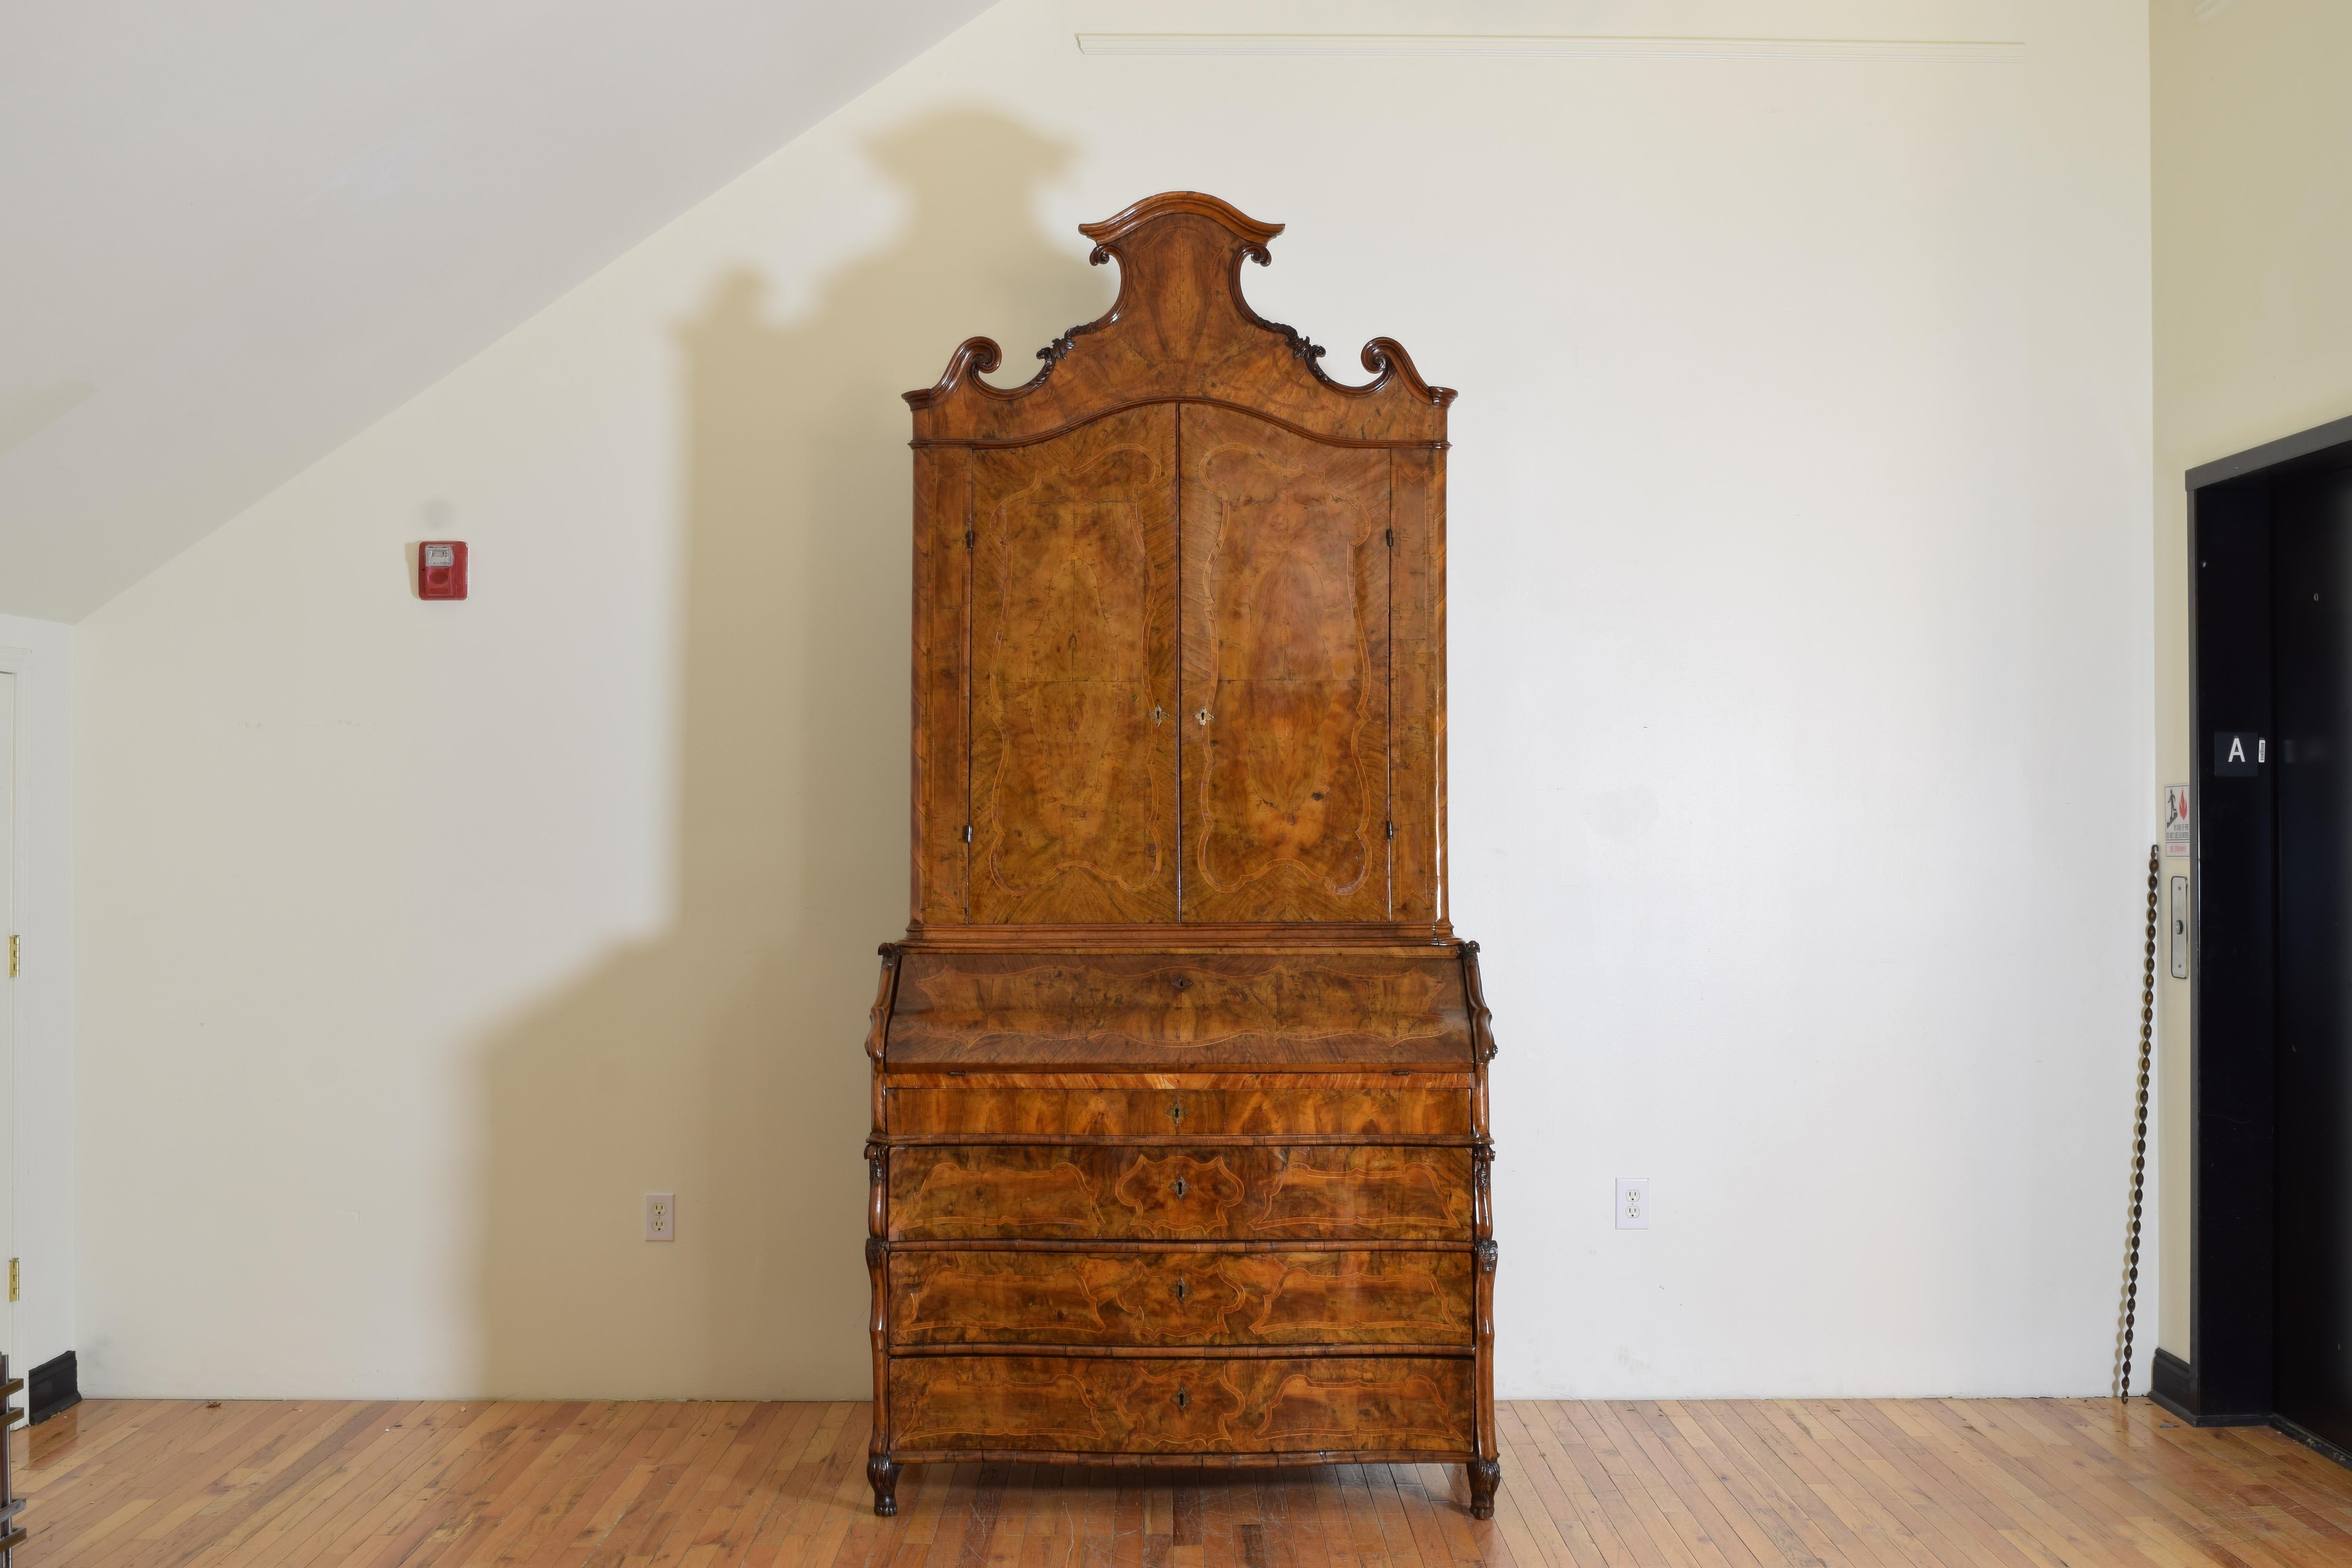 Constructed in the opulent style of Milan, Italy during the mid 18th century this two piece cabinet features a bookshelf in the top section and a fold-down secretary with drawers below, the entire outer and secretary portion covered in rich walnut